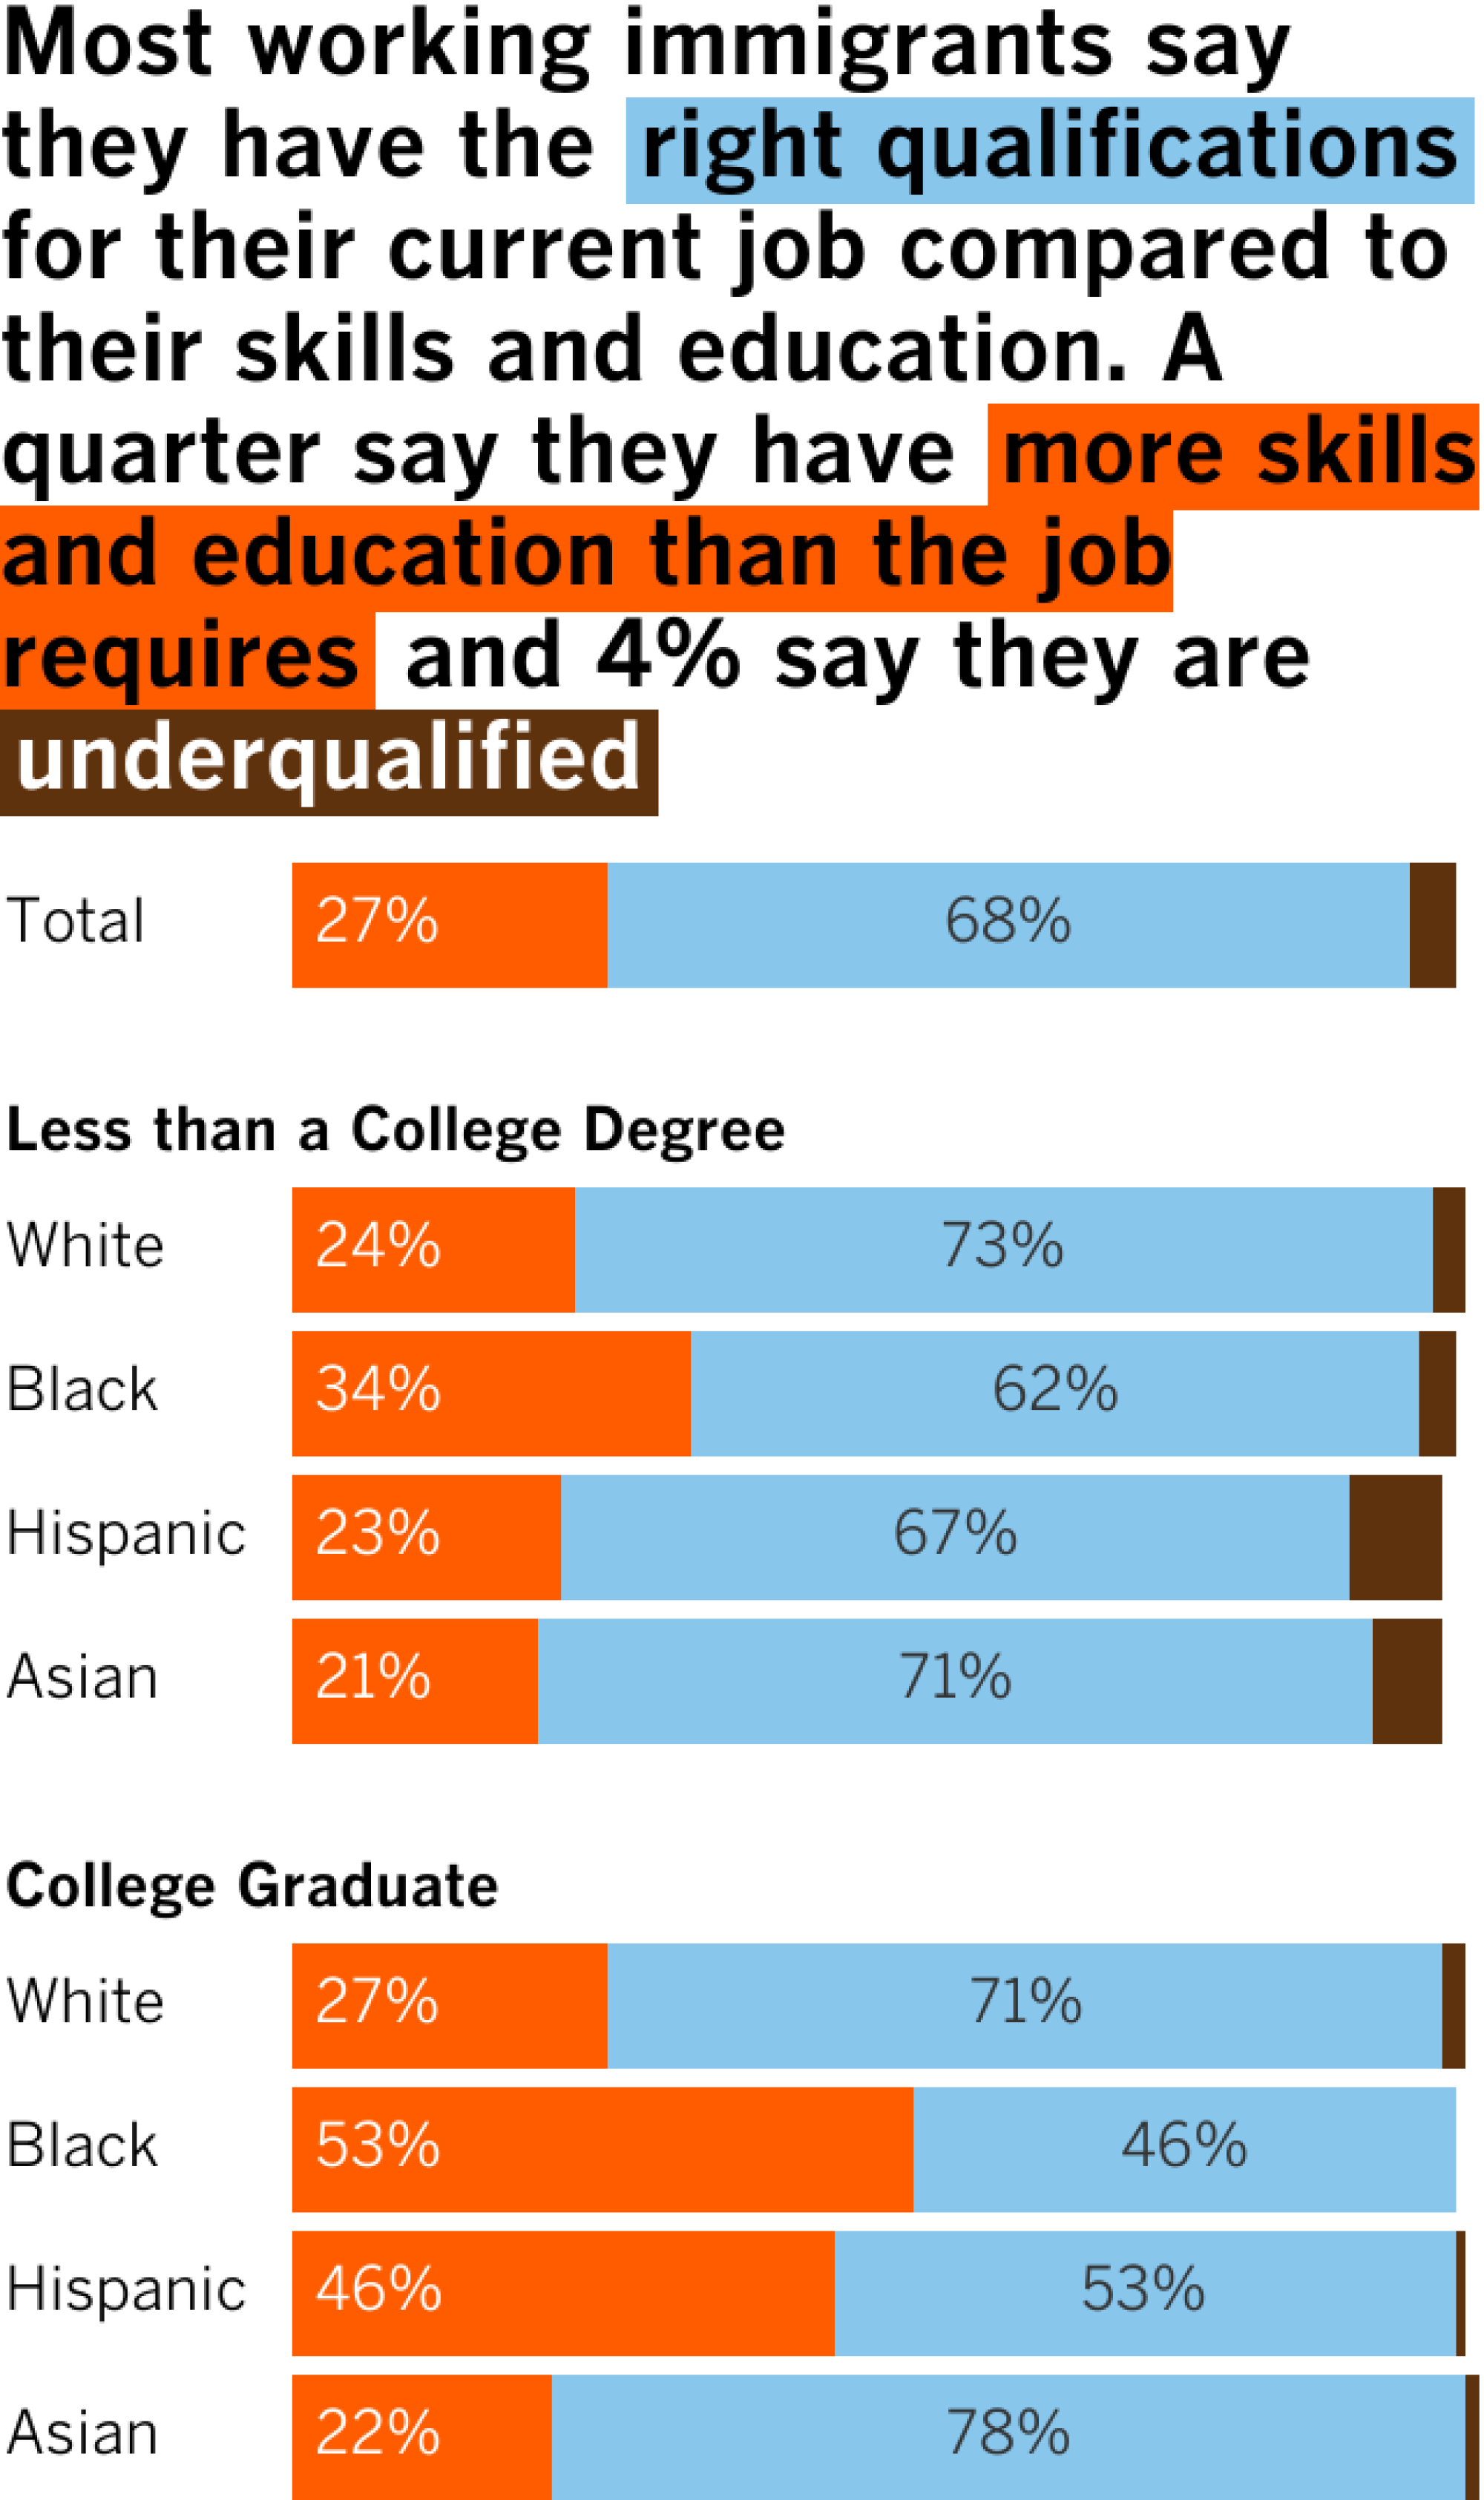 Chart showing percentage breakdown of what working immigrants say about qualifications for their current job